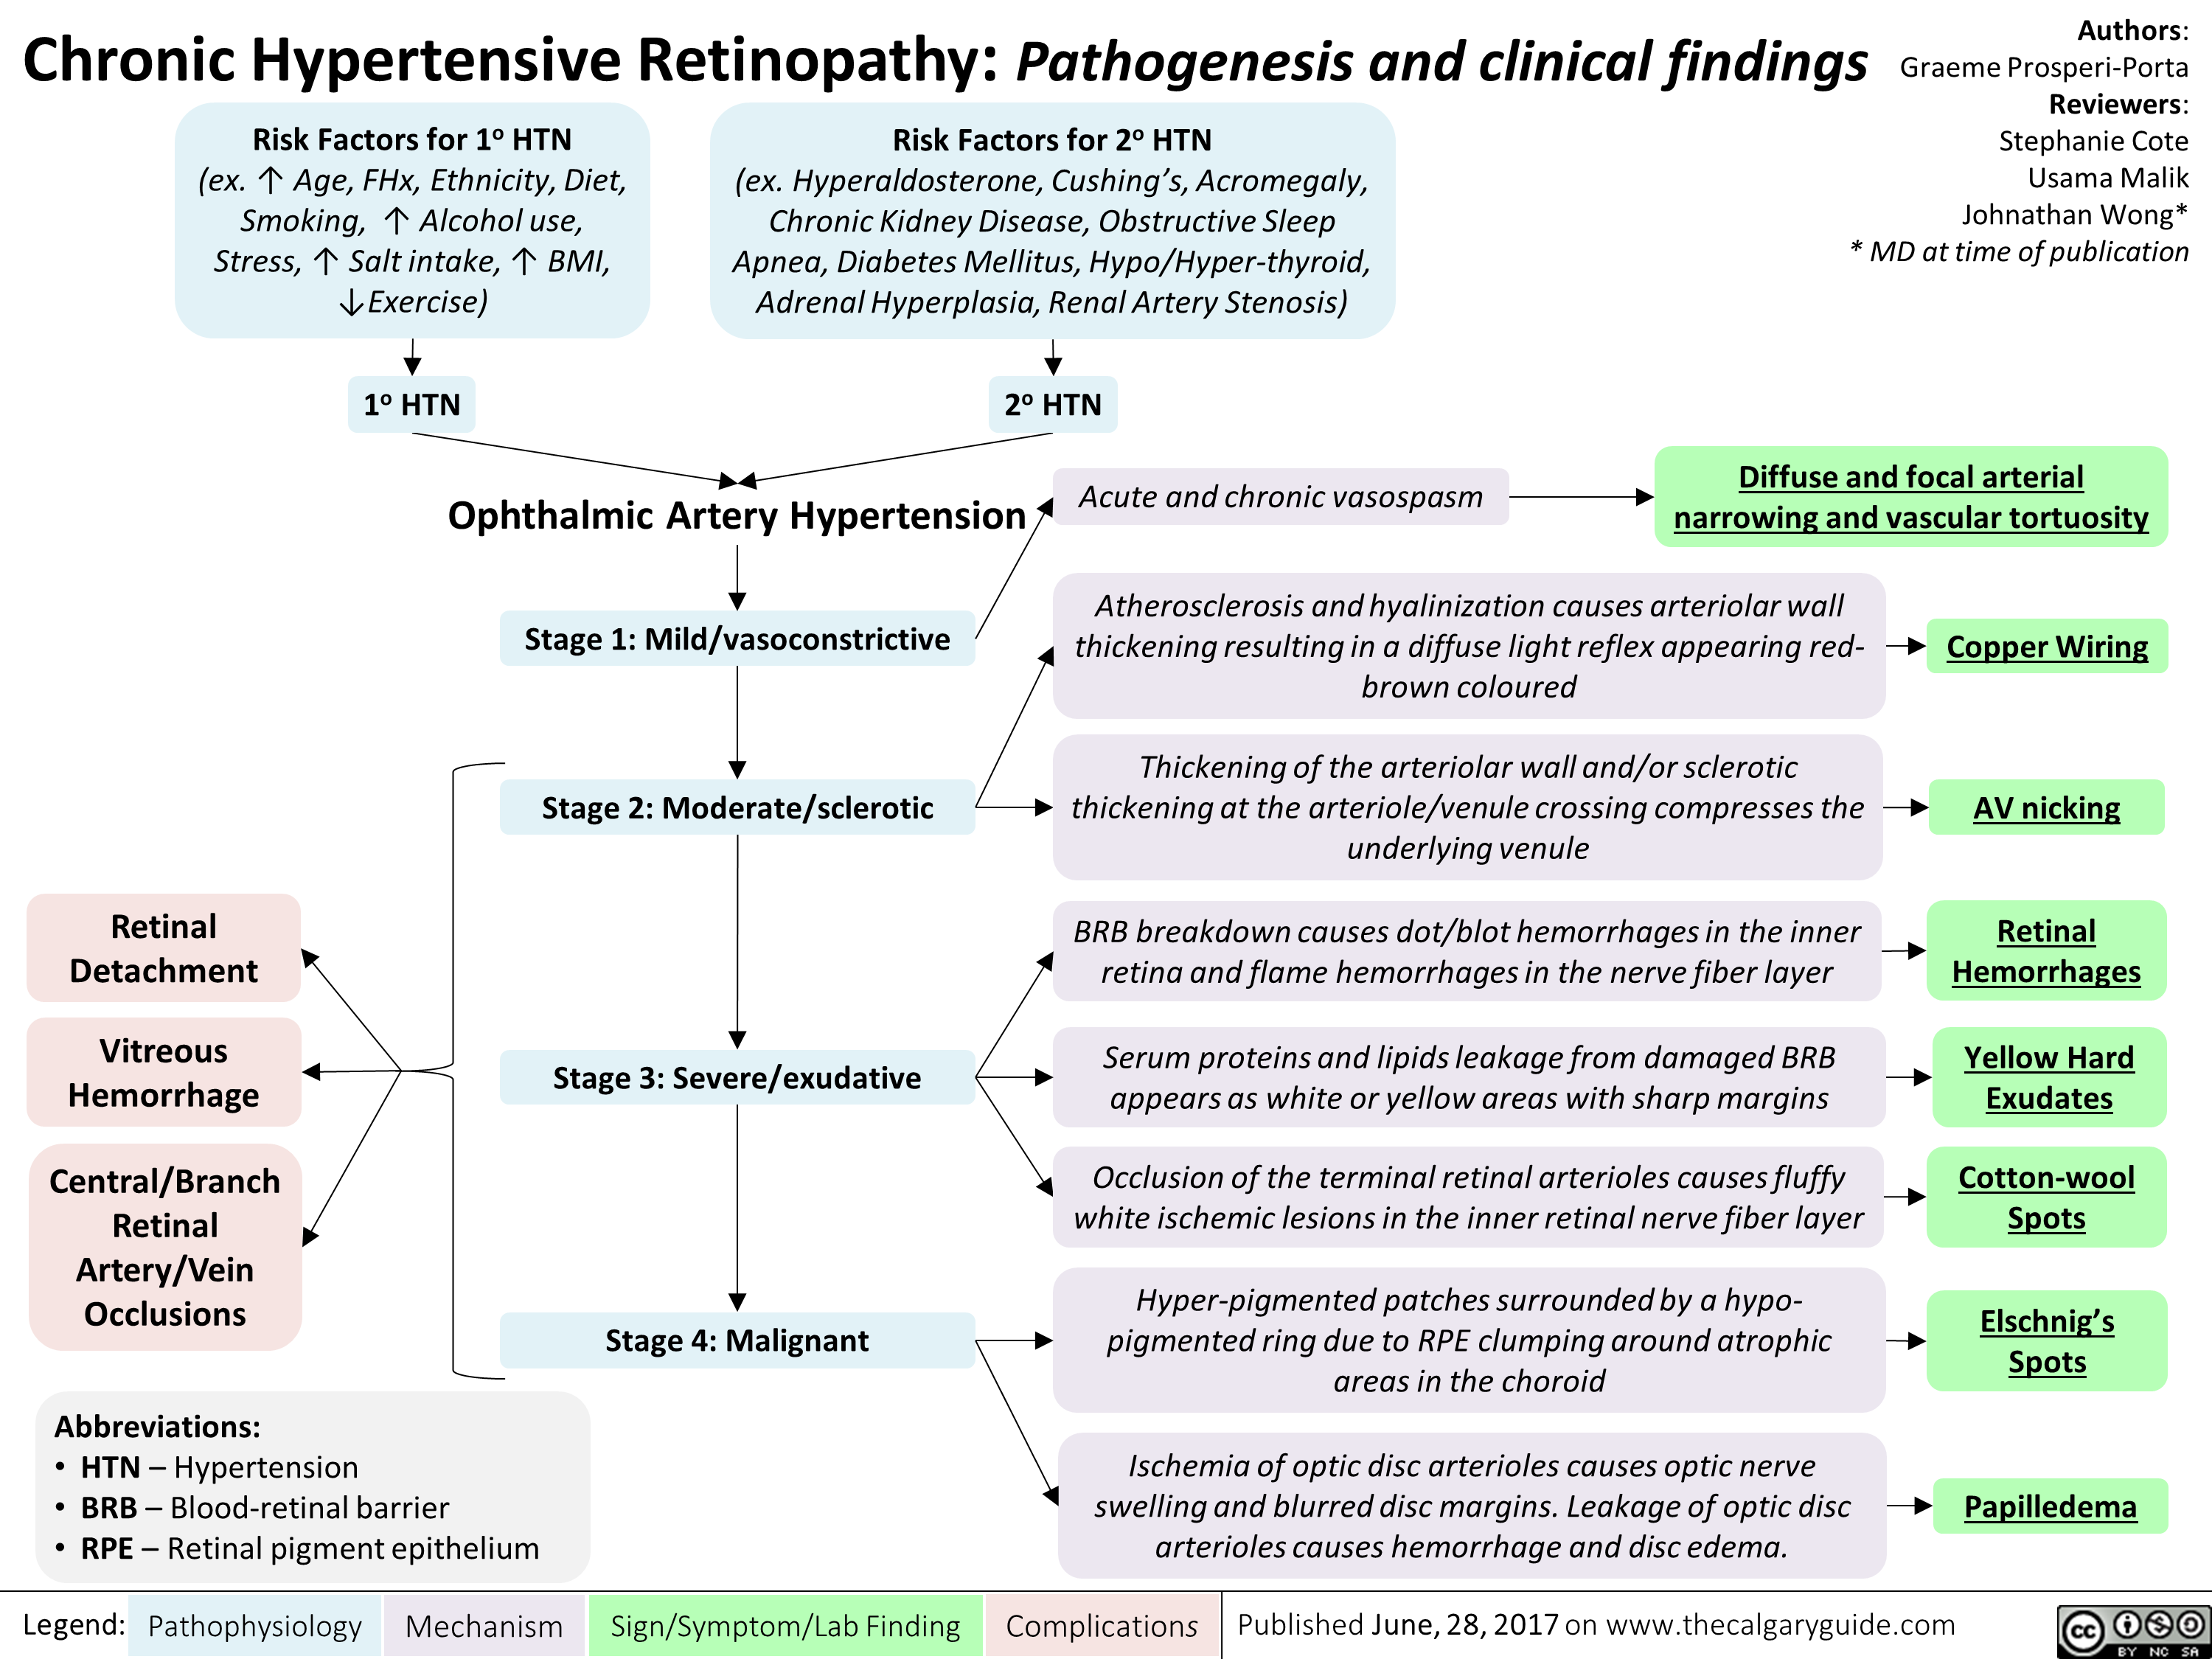 Chronic Hypertensive Retinopathy: Pathogenesis and clinical findings 
Risk Factors for 1° HTN (ex. 1` Age, FHx, Ethnicity, Diet, Smoking, 1` Alcohol use, Stress, 1` Salt intake, 1` BMI, 1, Exercise) • 1° HTN 
Retinal Detachment 
Vitreous Hemorrhage 
Central/Branch Retinal Artery/Vein Occlusions 
Risk Factors for 2° HTN (ex. Hyperaldosterone, Cushing's, Acromegaly, Chronic Kidney Disease, Obstructive Sleep Apnea, Diabetes Mellitus, Hypo/Hyper-thyroid, Adrenal Hyperplasia, Renal Artery Stenosis) 
2° HTN 
Ophthalmic Artery Hypertension ,17 
Stage 1: Mild/vasoconstrictive 
Stage 2: Moderate/sclerotic 
Stage 3: Severe/exudative 
Stage 4: Malignant 
Abbreviations: • HTN — Hypertension • BRB — Blood-retinal barrier • RPE — Retinal pigment epithelium 
Legend: 
Pathophysiology 
Mechanism 
Acute and chronic vasospasm 


Authors: Graeme Prosperi-Porta Reviewers: Stephanie Cote Usama Malik Johnathan Wong* * MD at time of publication 
Diffuse and focal arterial  narrowing and vascular tortuosity 
Atherosclerosis and hyalinization causes arteriolar wall thickening resulting in a diffuse light reflex appearing red-brown coloured 
Thickening of the arteriolar wall and/or sclerotic thickening at the arteriole/venule crossing compresses the underlying venule 
BRB breakdown causes dot/blot hemorrhages in the inner retina and flame hemorrhages in the nerve fiber layer 
Serum proteins and lipids leakage from damaged BRB appears as white or yellow areas with sharp margins 
Occlusion of the terminal retinal arterioles causes fluffy white ischemic lesions in the inner retinal nerve fiber layer 
Hyper-pigmented patches surrounded by a hypo-pigmented ring due to RPE clumping around atrophic areas in the choroid 
Sign/Symptom/Lab Finding 
lschemia of optic disc arterioles causes optic nerve swelling and blurred disc margins. Leakage of optic disc arterioles causes hemorrhage and disc edema. 
Complications 
Copper Wiring 
AV nicking 
Retinal  Hemorrhages 
Yellow Hard Exudates  
Cotton-wool Spots  
Elschnig's Spots  
Papilledema 